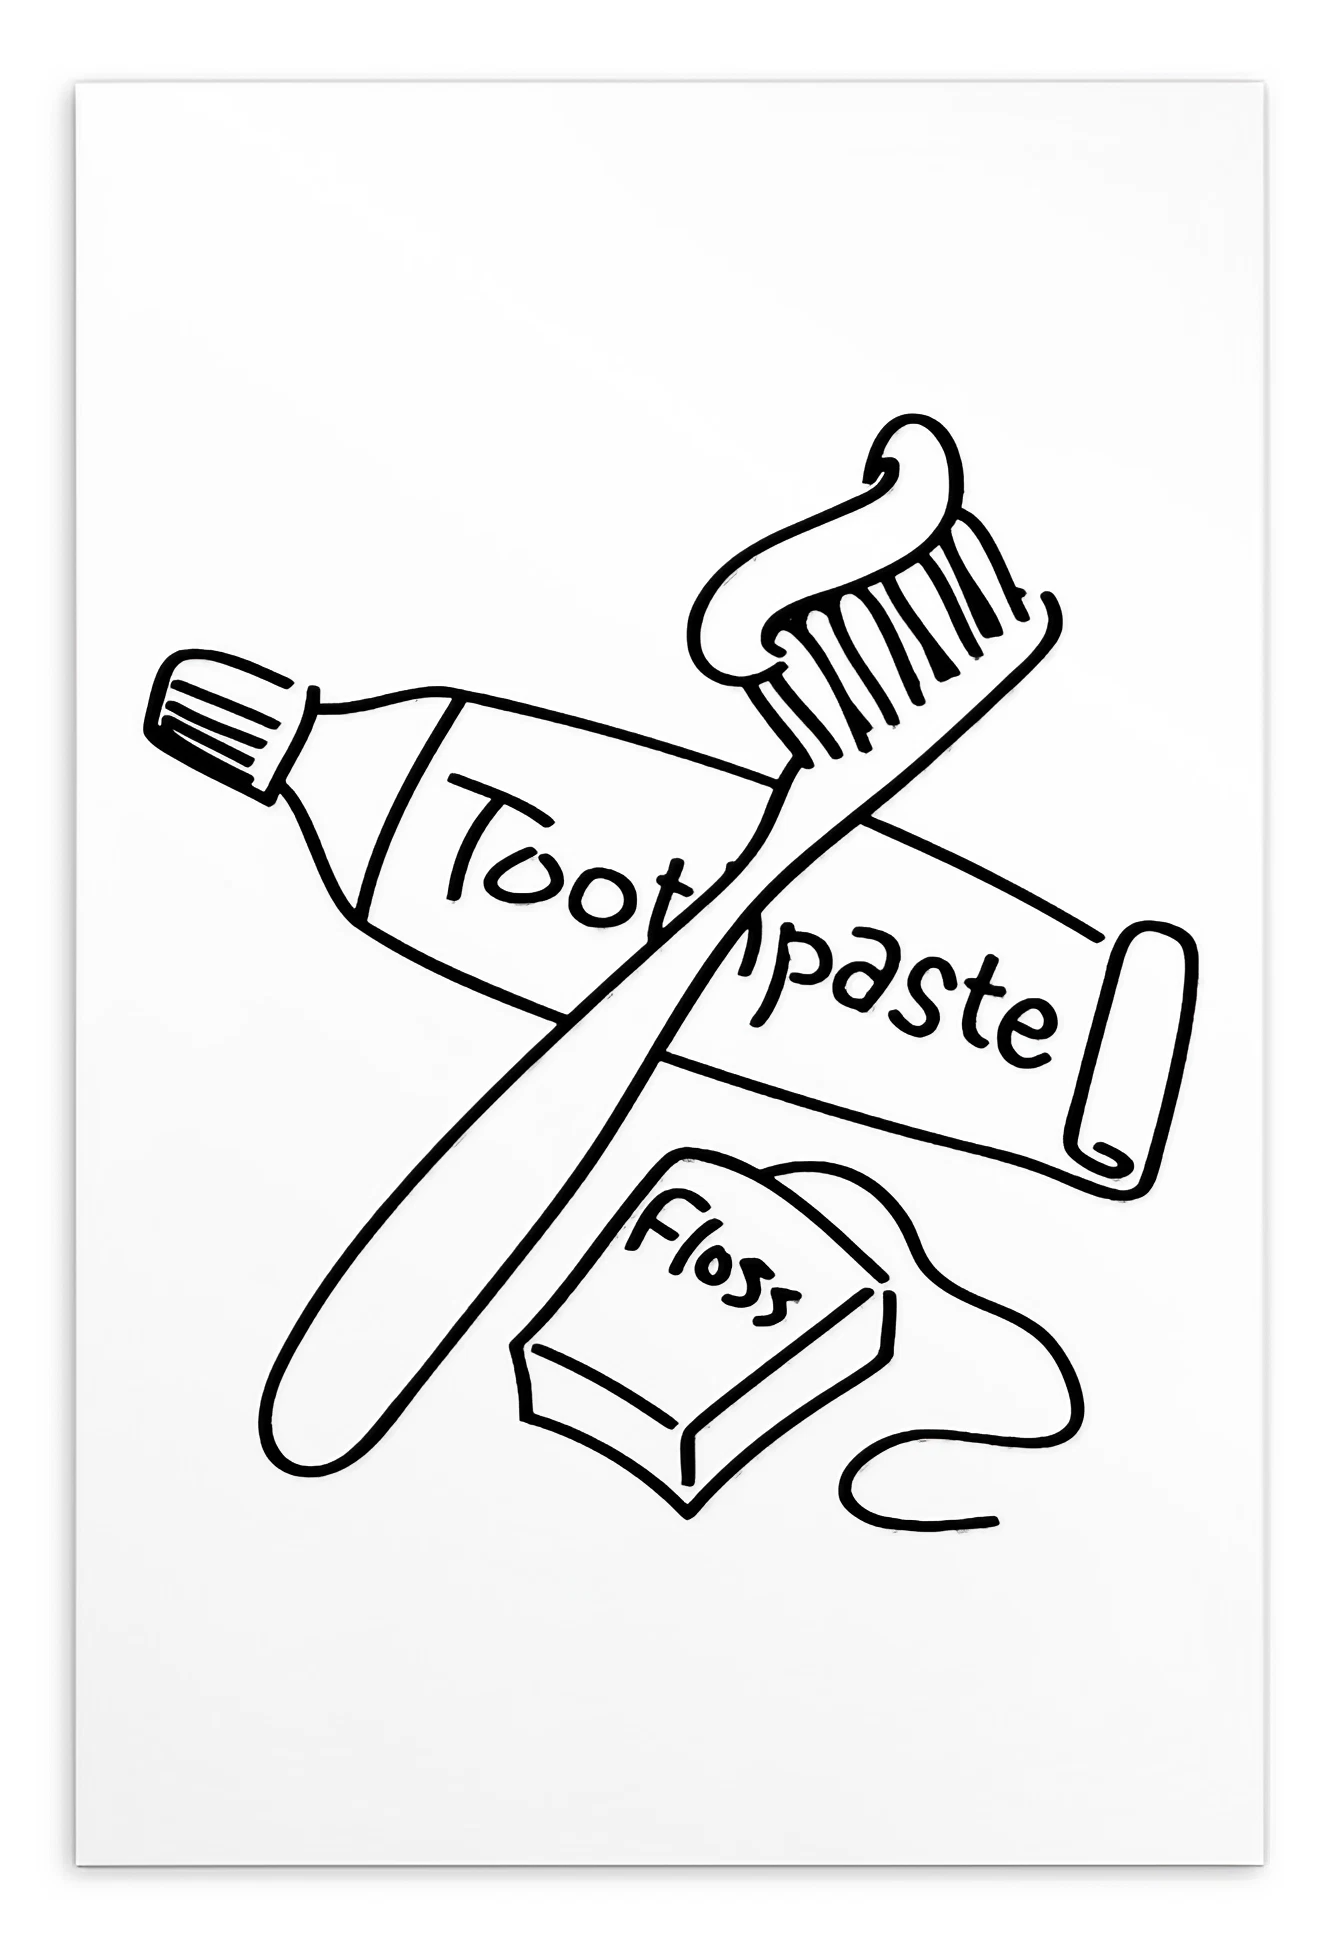 Colouring-In Cards - Toothpaste, Toothbrush And Dental Floss